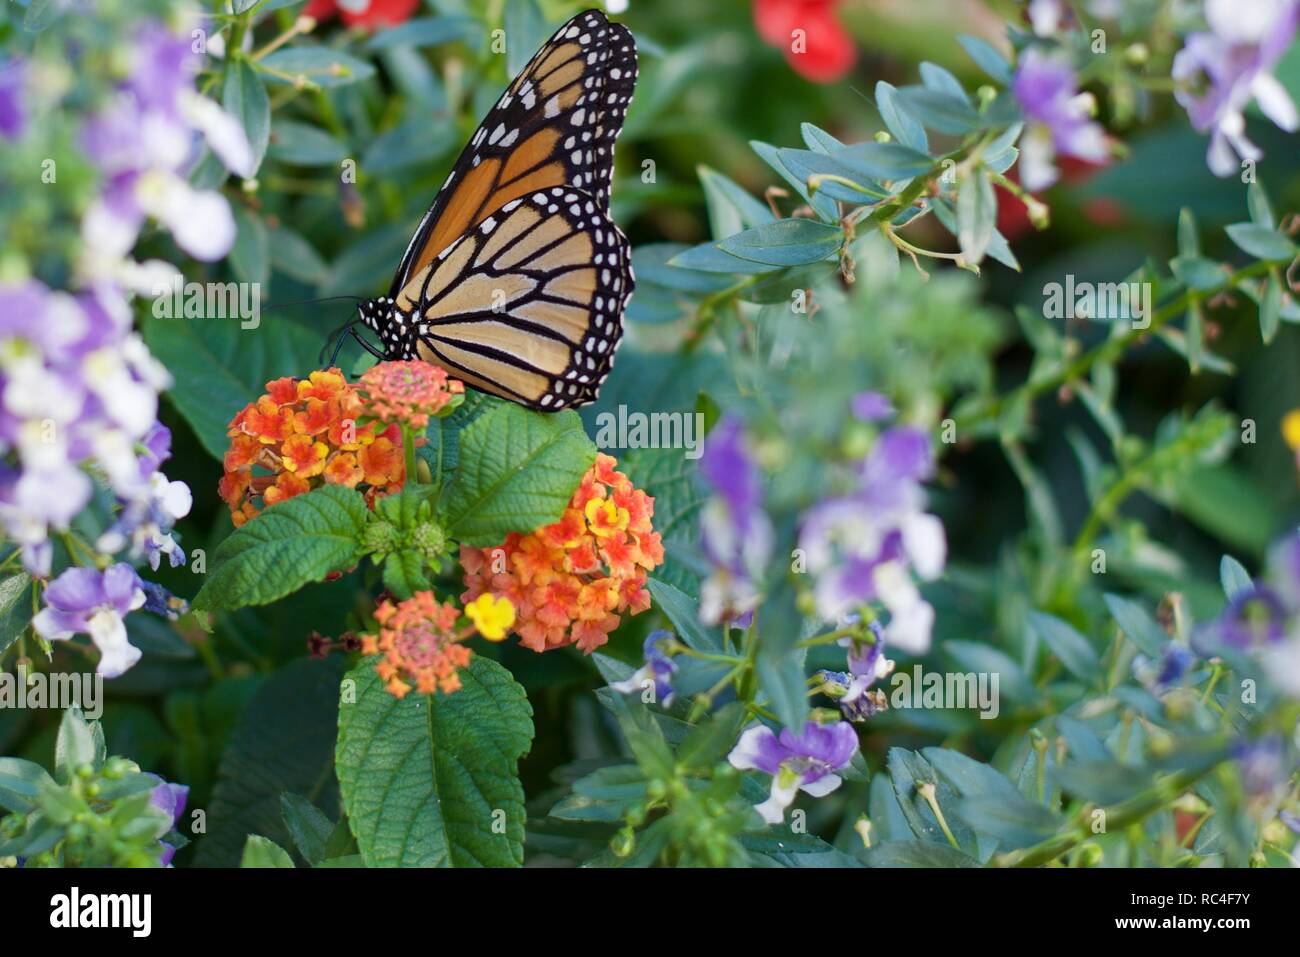 monarch butterfly over flowers Stock Photo